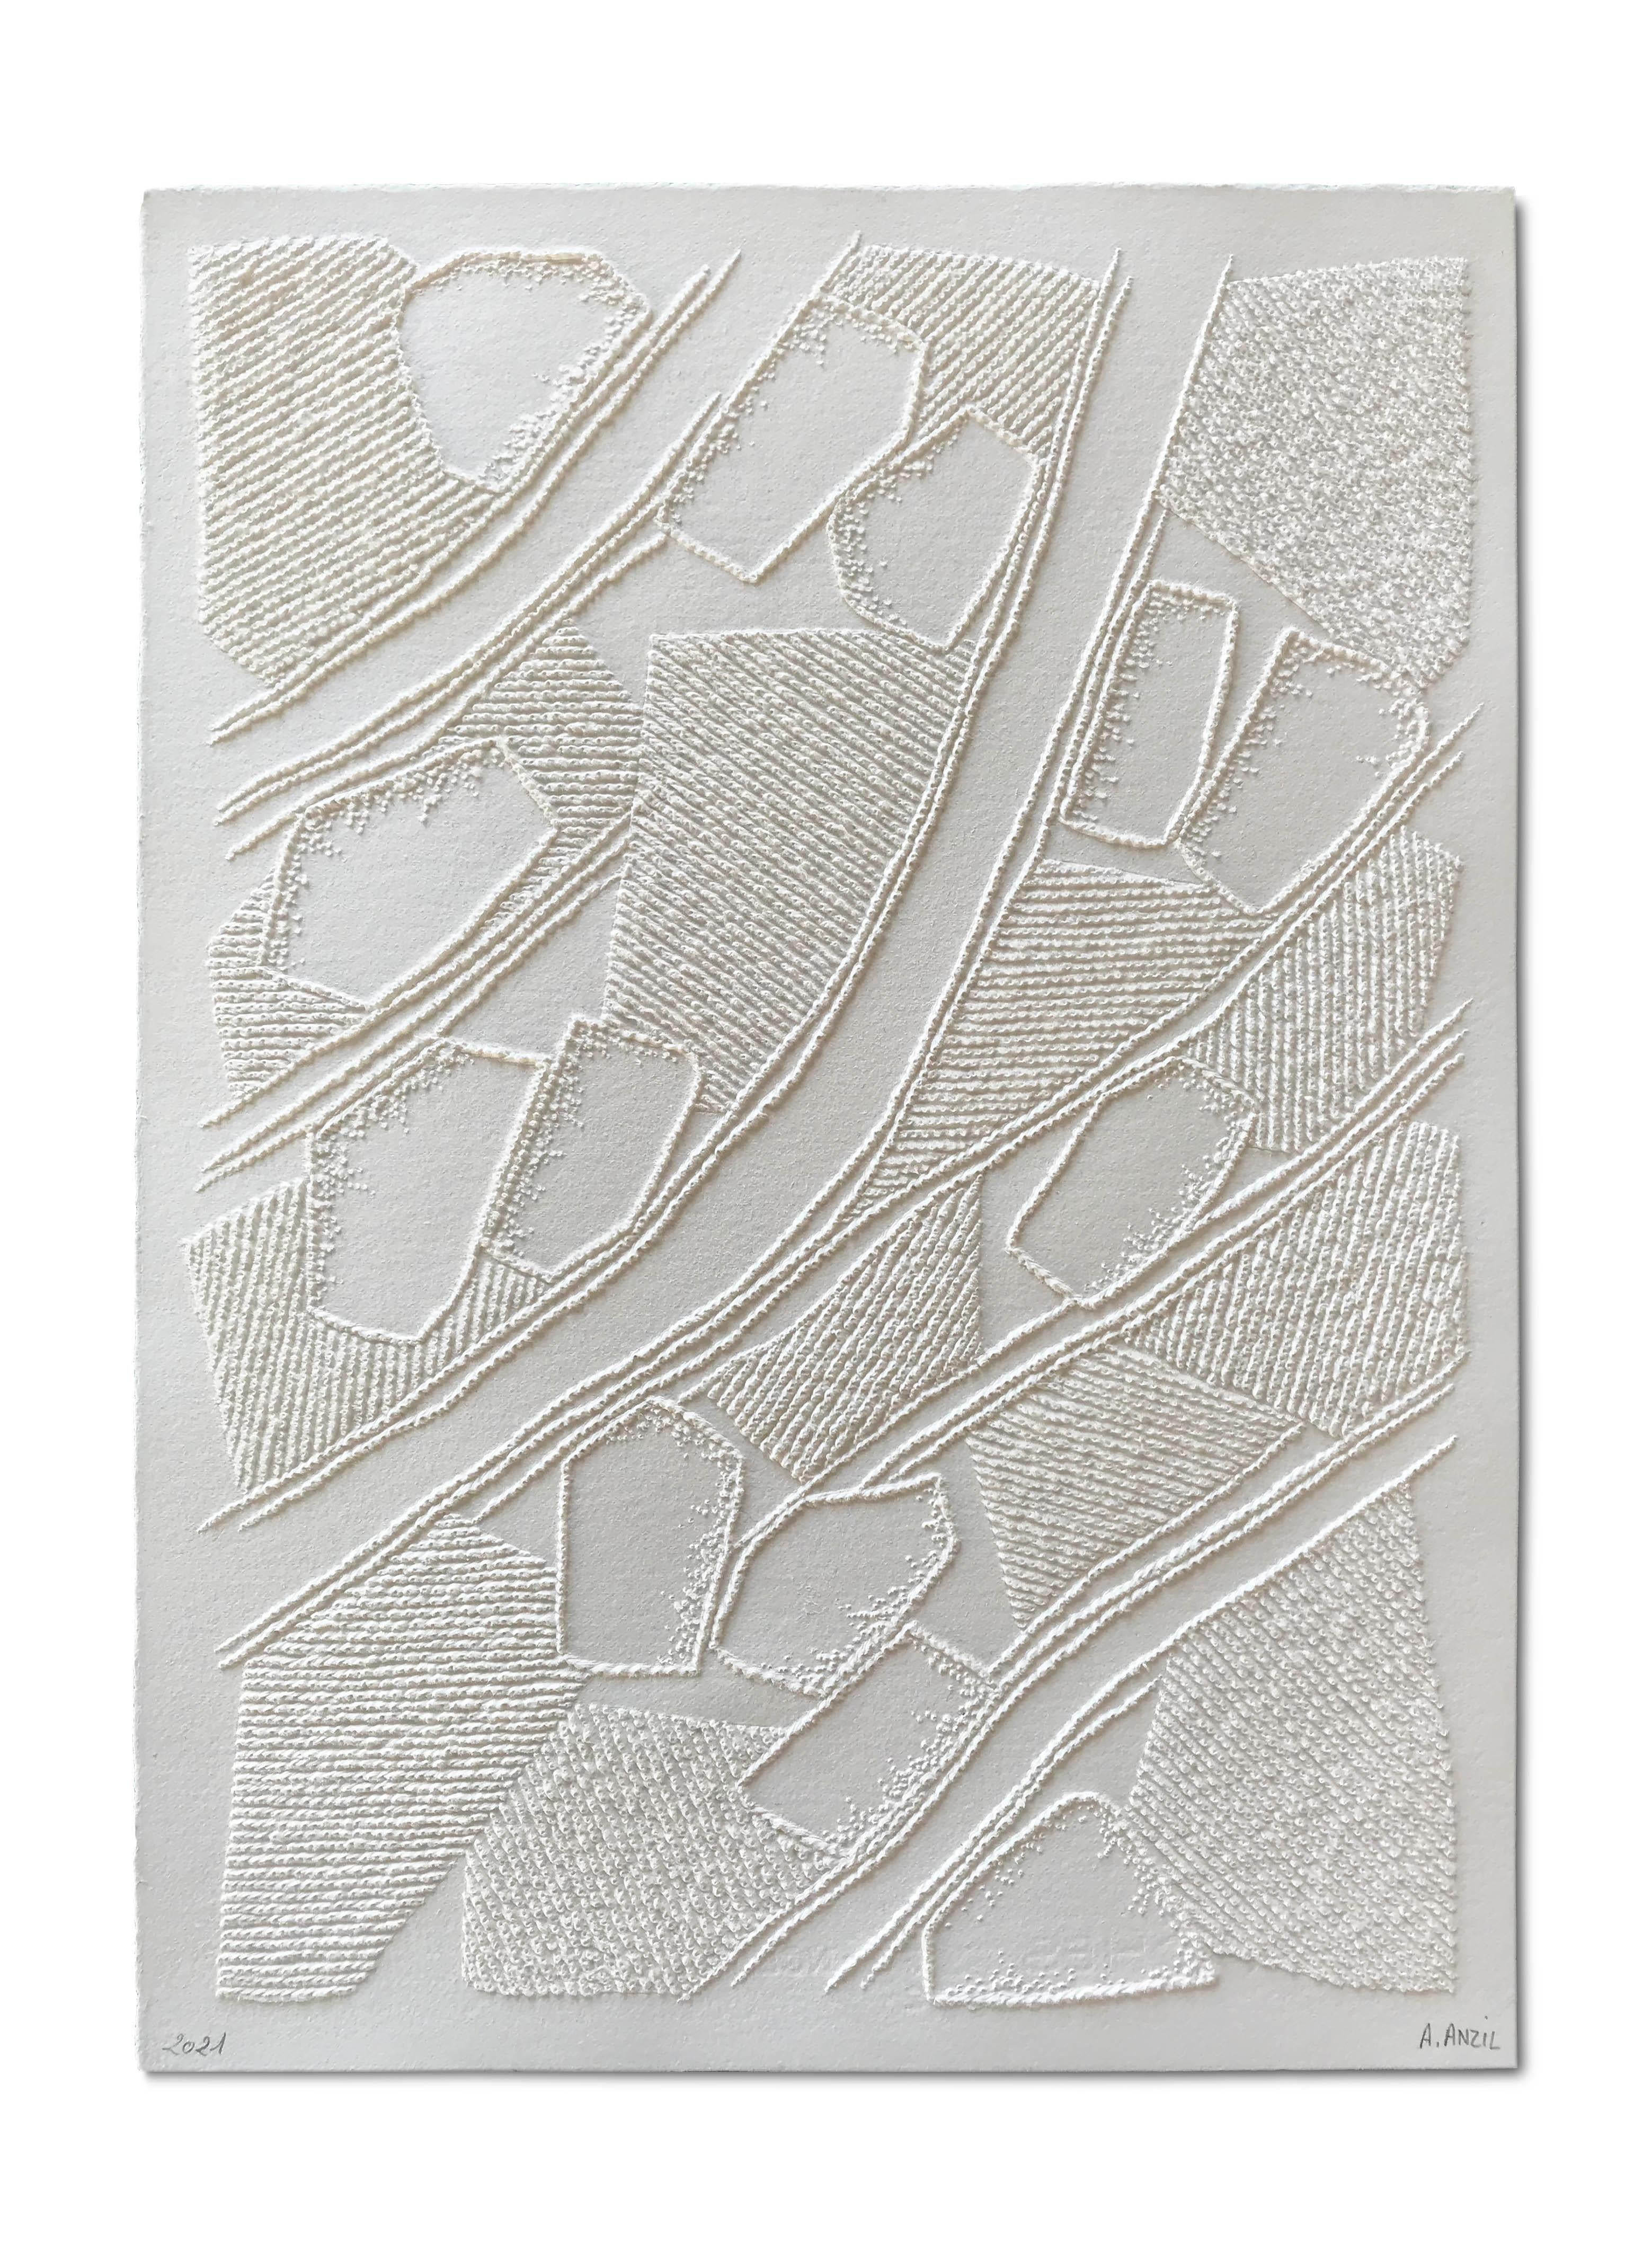 Antonin Anzil Abstract Drawing - Salinae - intricate white 3D abstract landscape drawing with pulled paper fiber